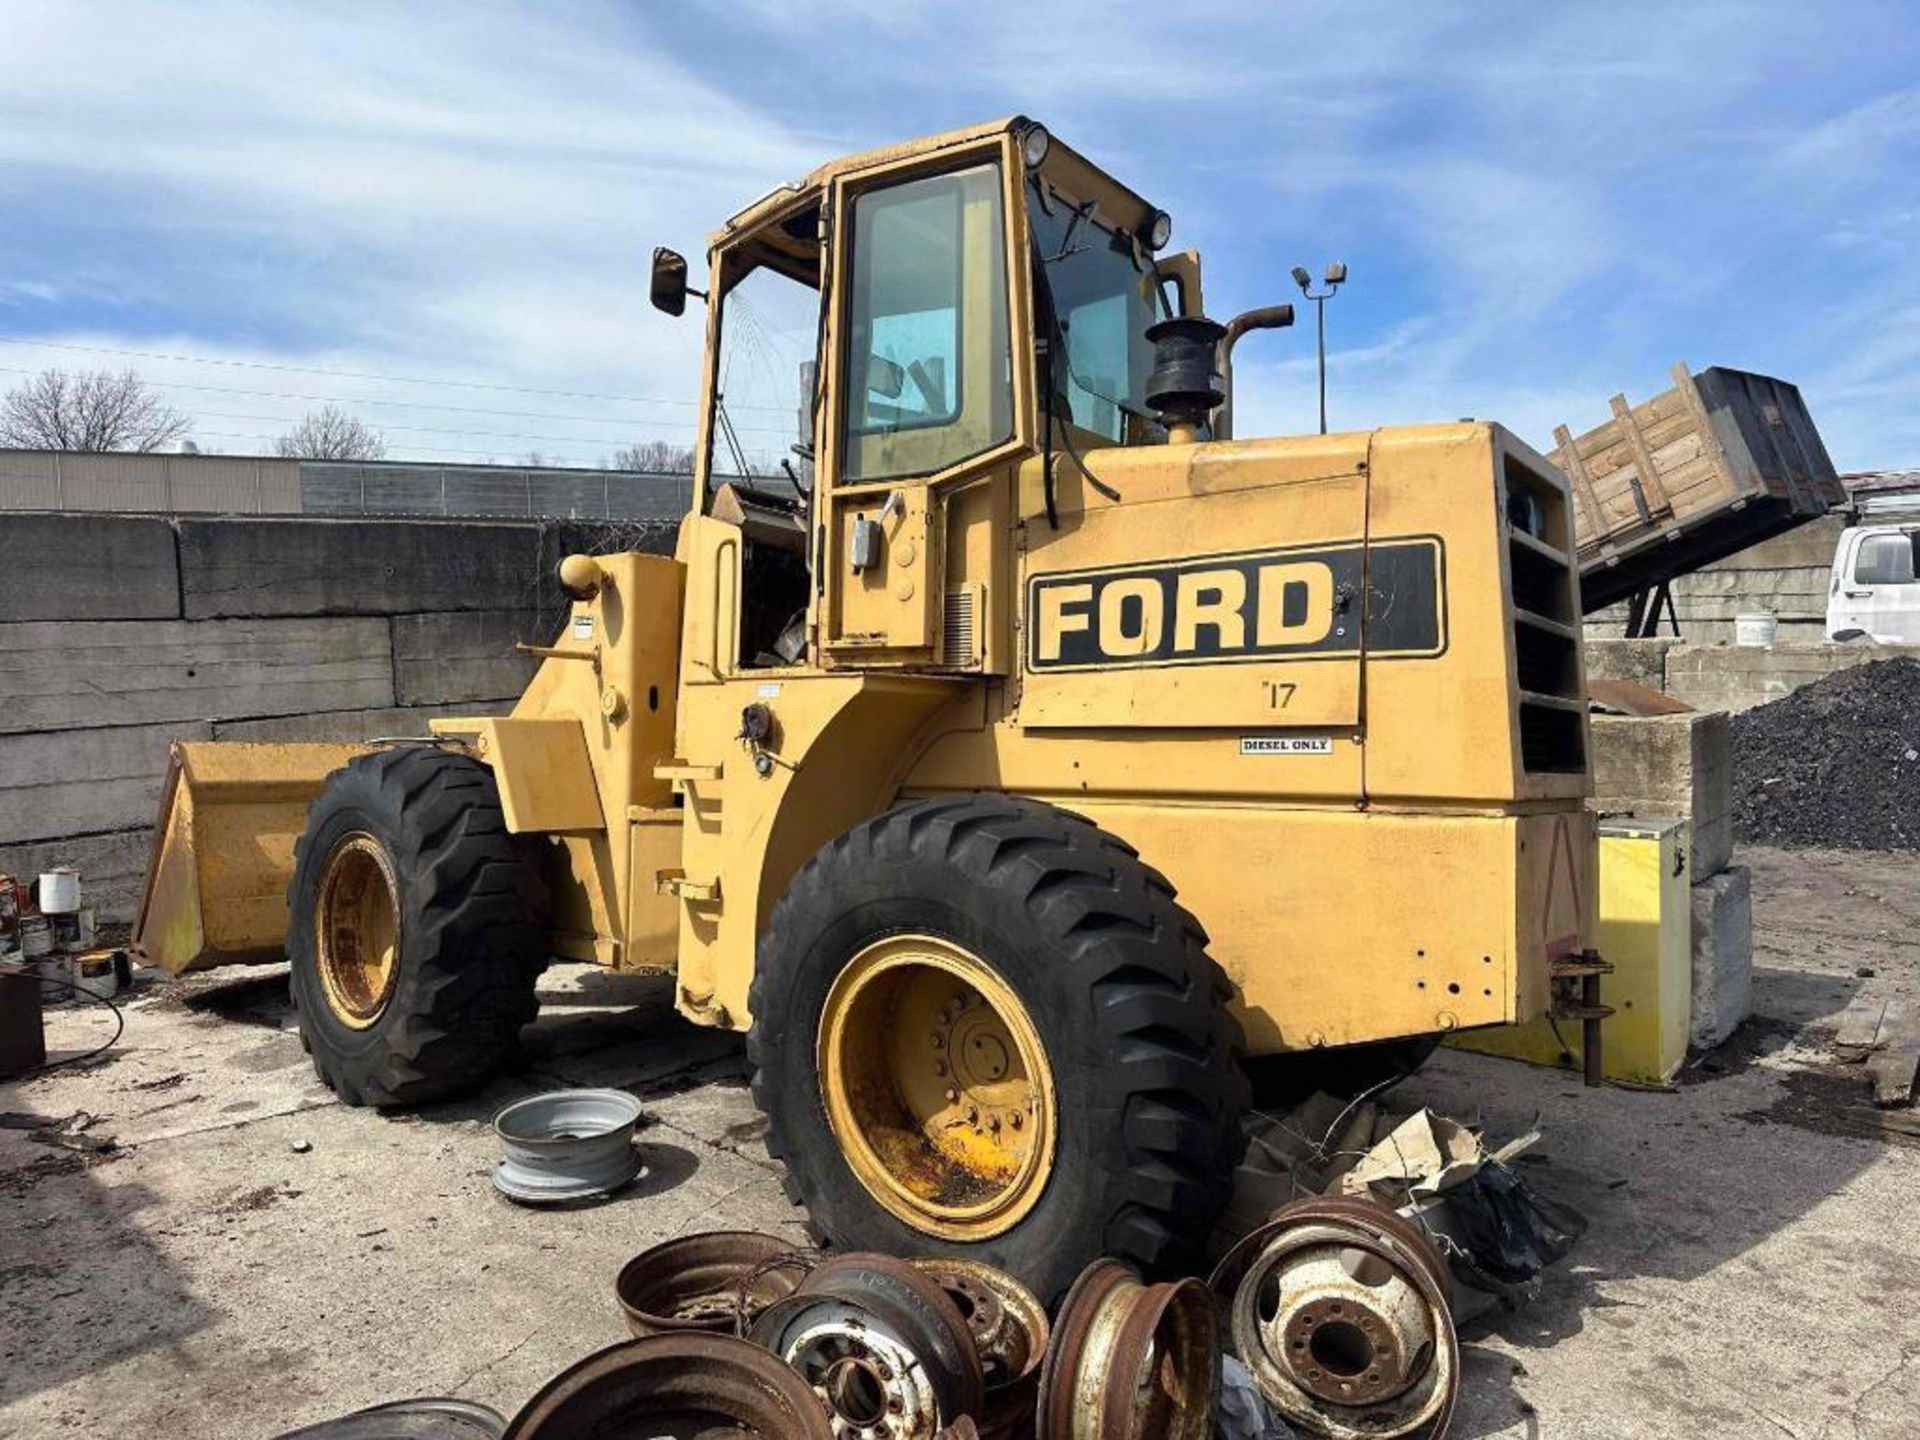 Ford A62 Diesel Loader (located off-site, please read description) - Image 3 of 14